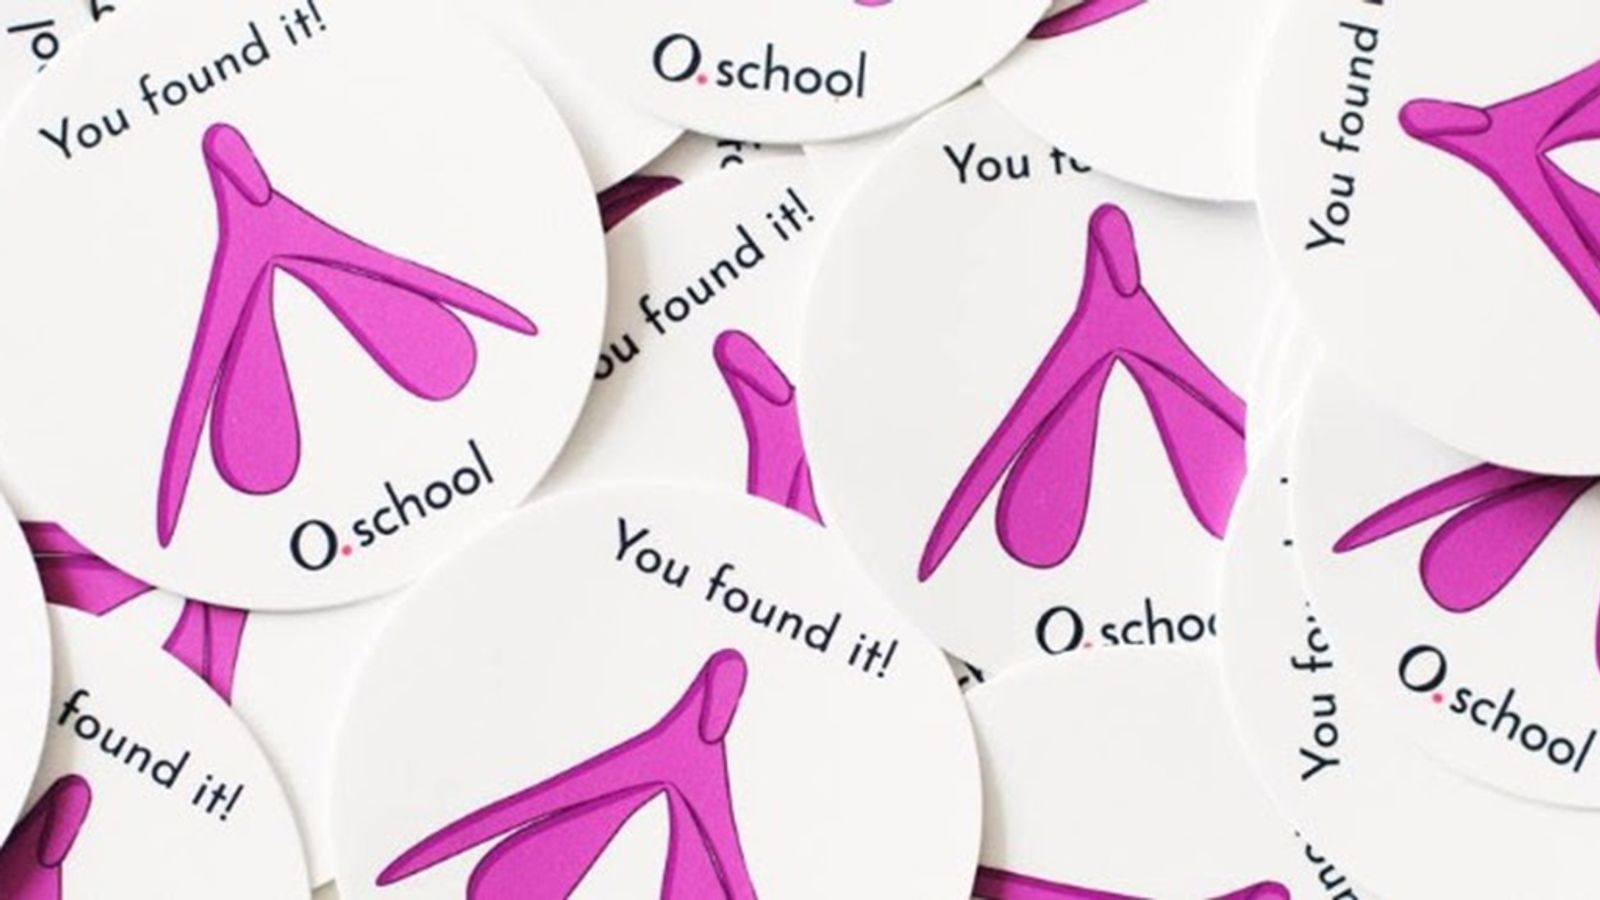 O.school Launches 'Back To School' Campaign for #BetterSexEd